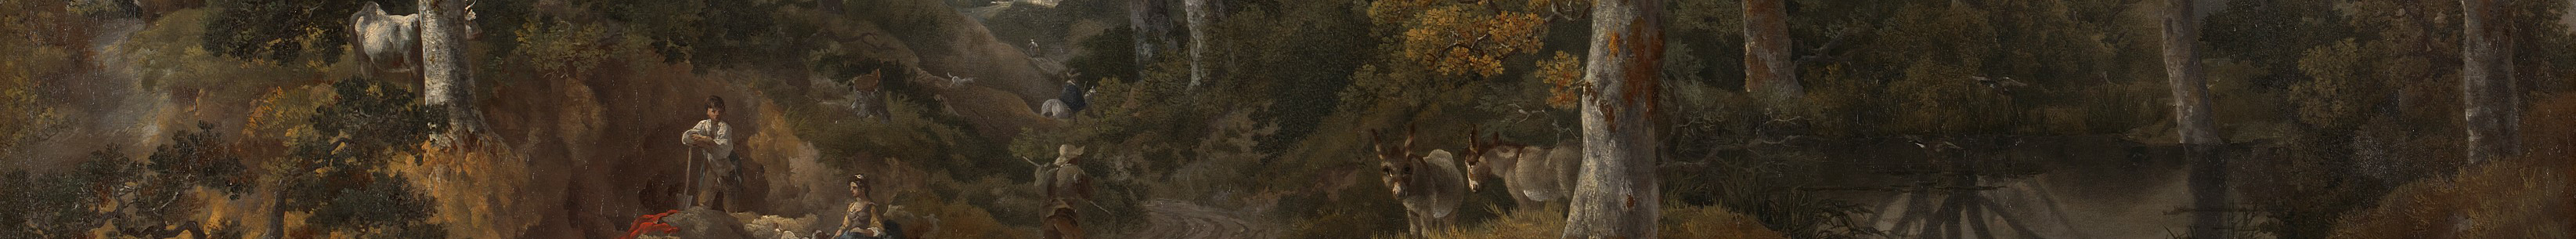 Cropped version of the National Gallery's 'Cornard Wood'